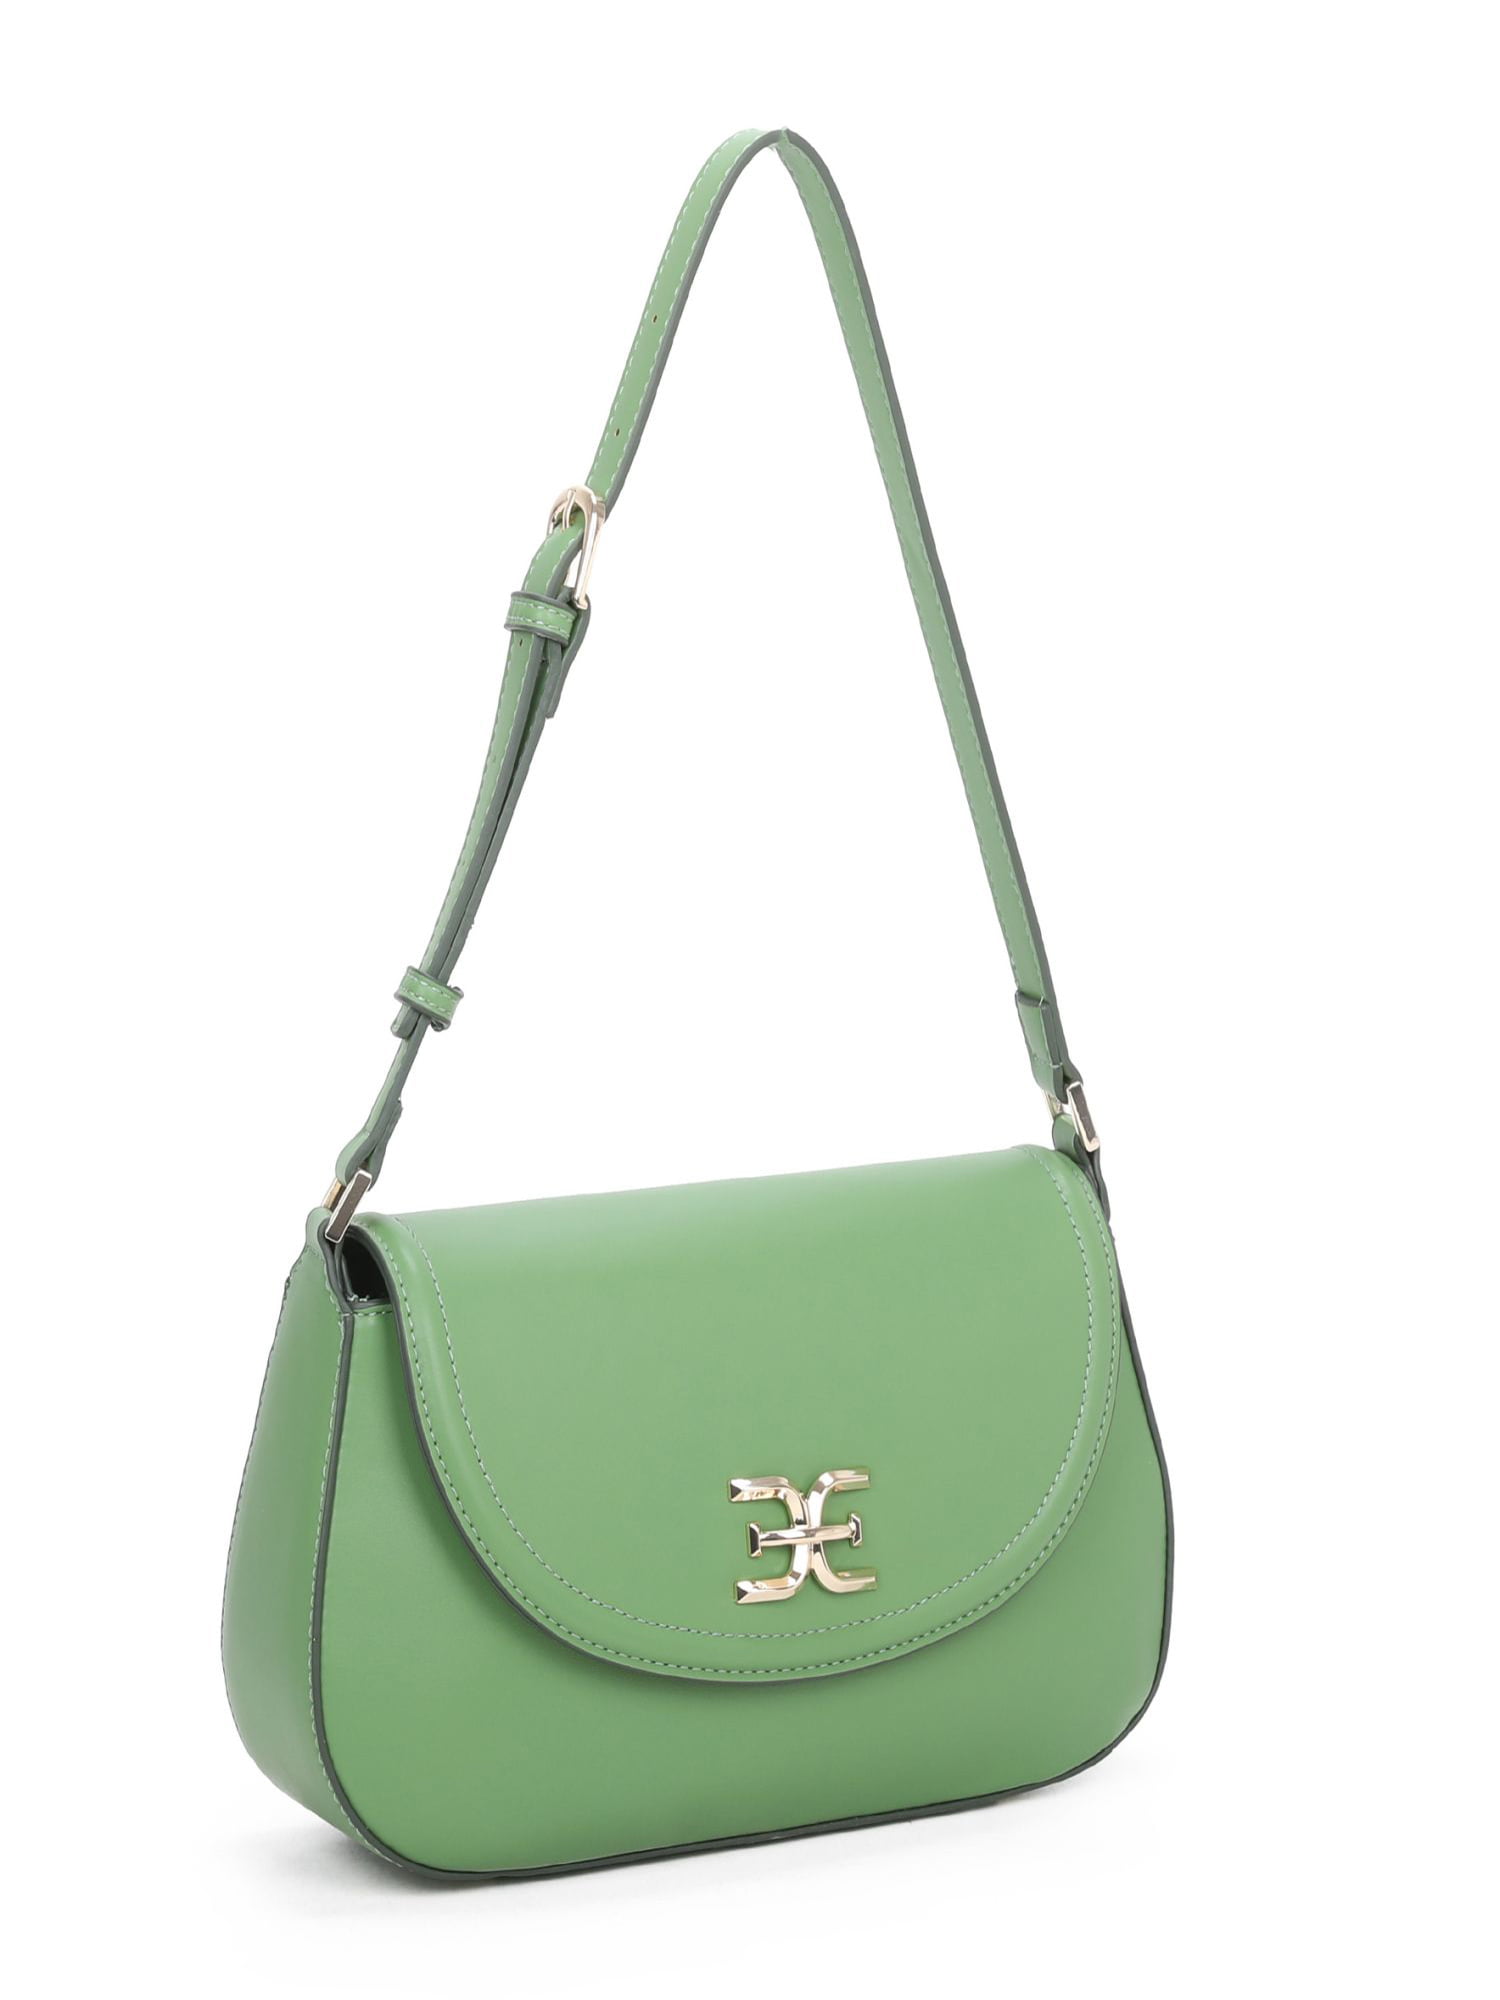 CATE JELLY BAG IN FOREST GREEN - Bellaboo